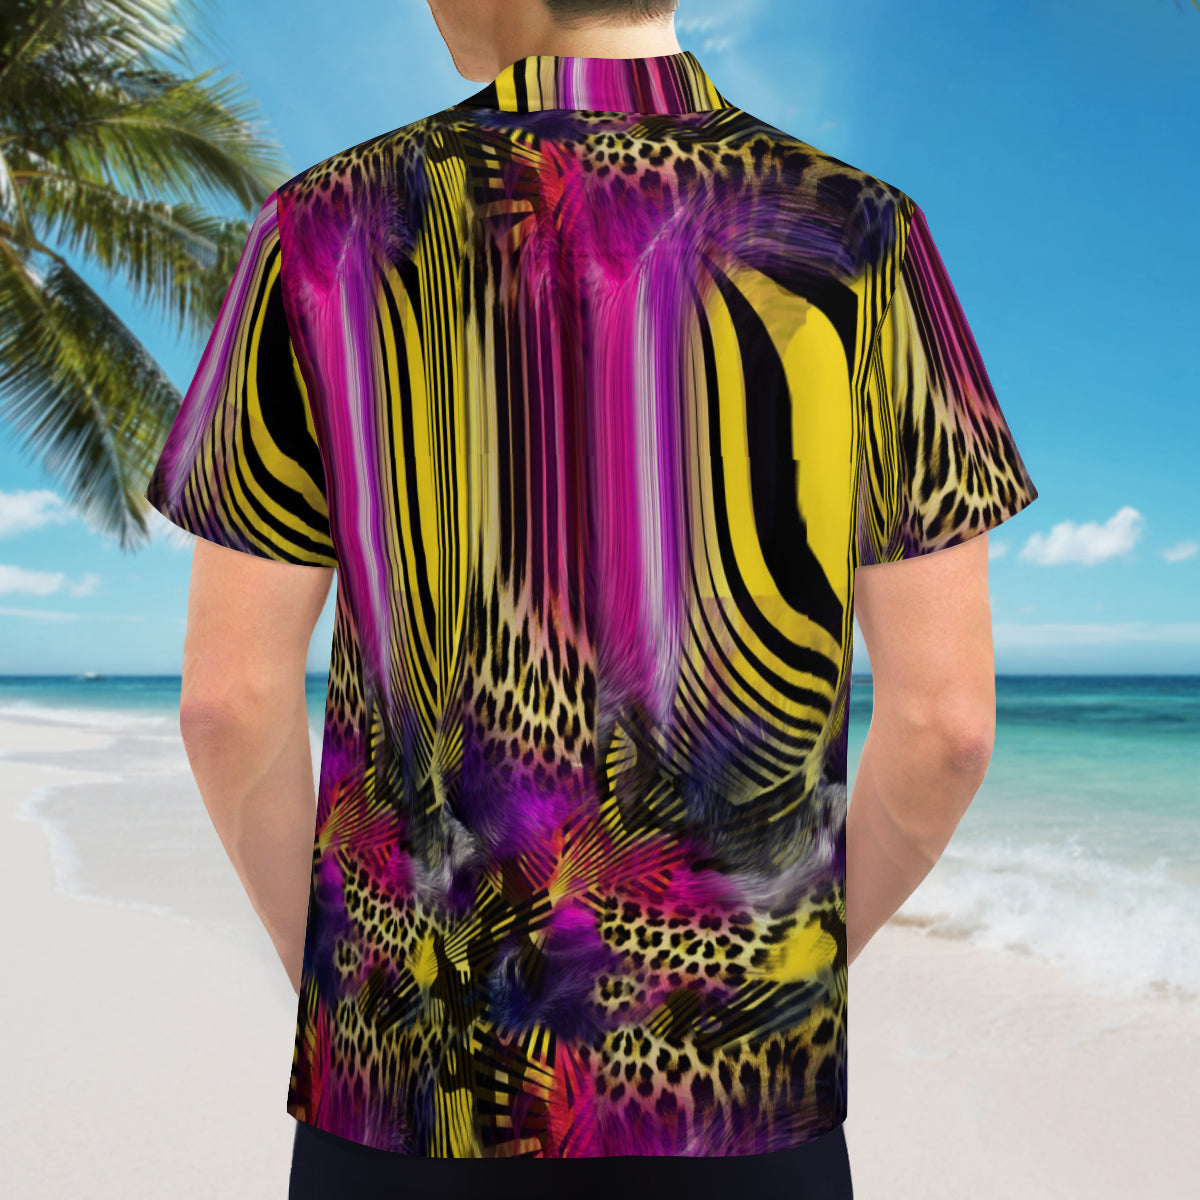 Hawaiian shirt - Vacation calls - stand out in a crowd